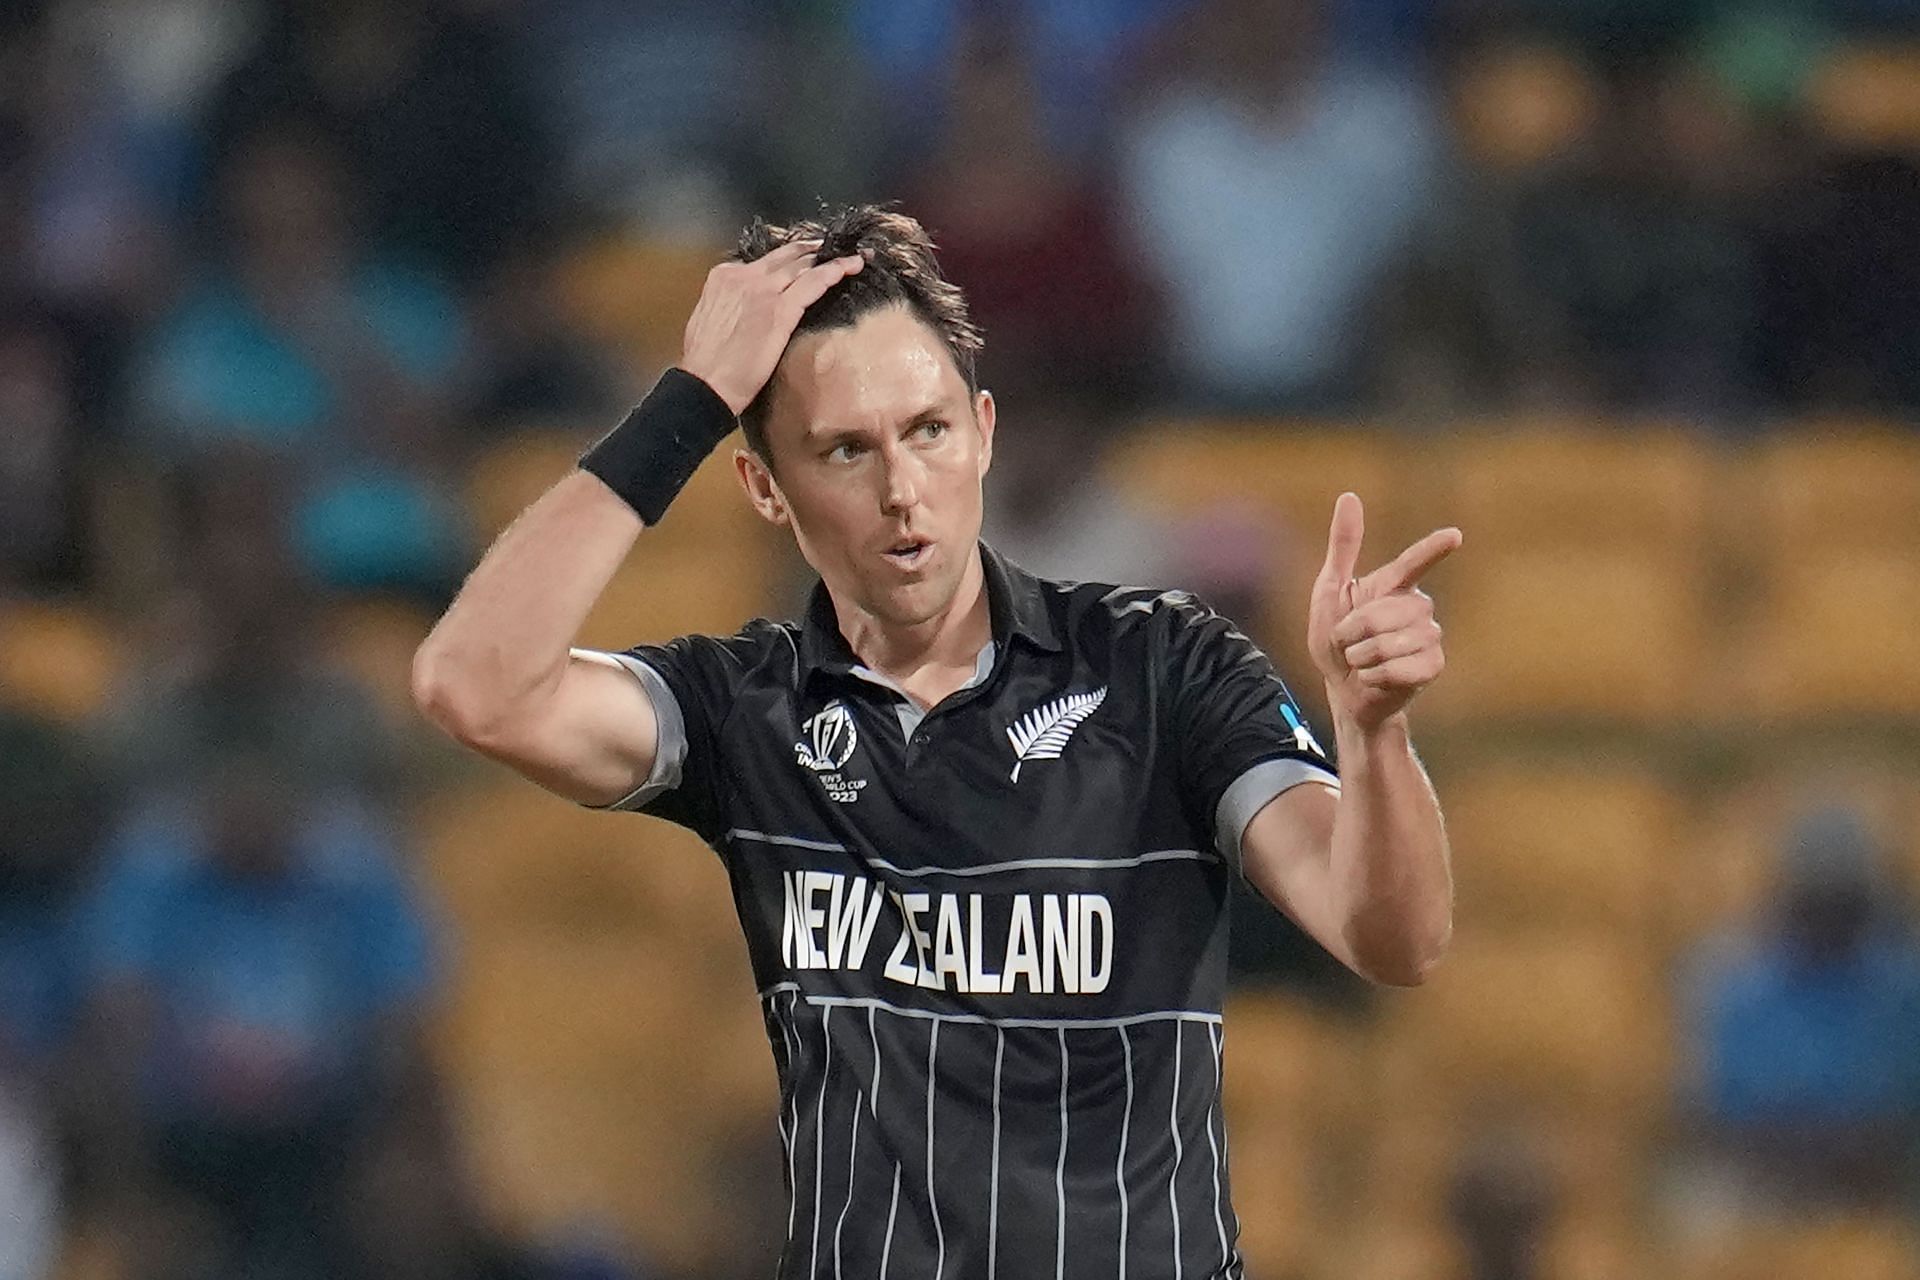 Trent Boult has not been at his penetrative best with the new ball. [P/C: AP]